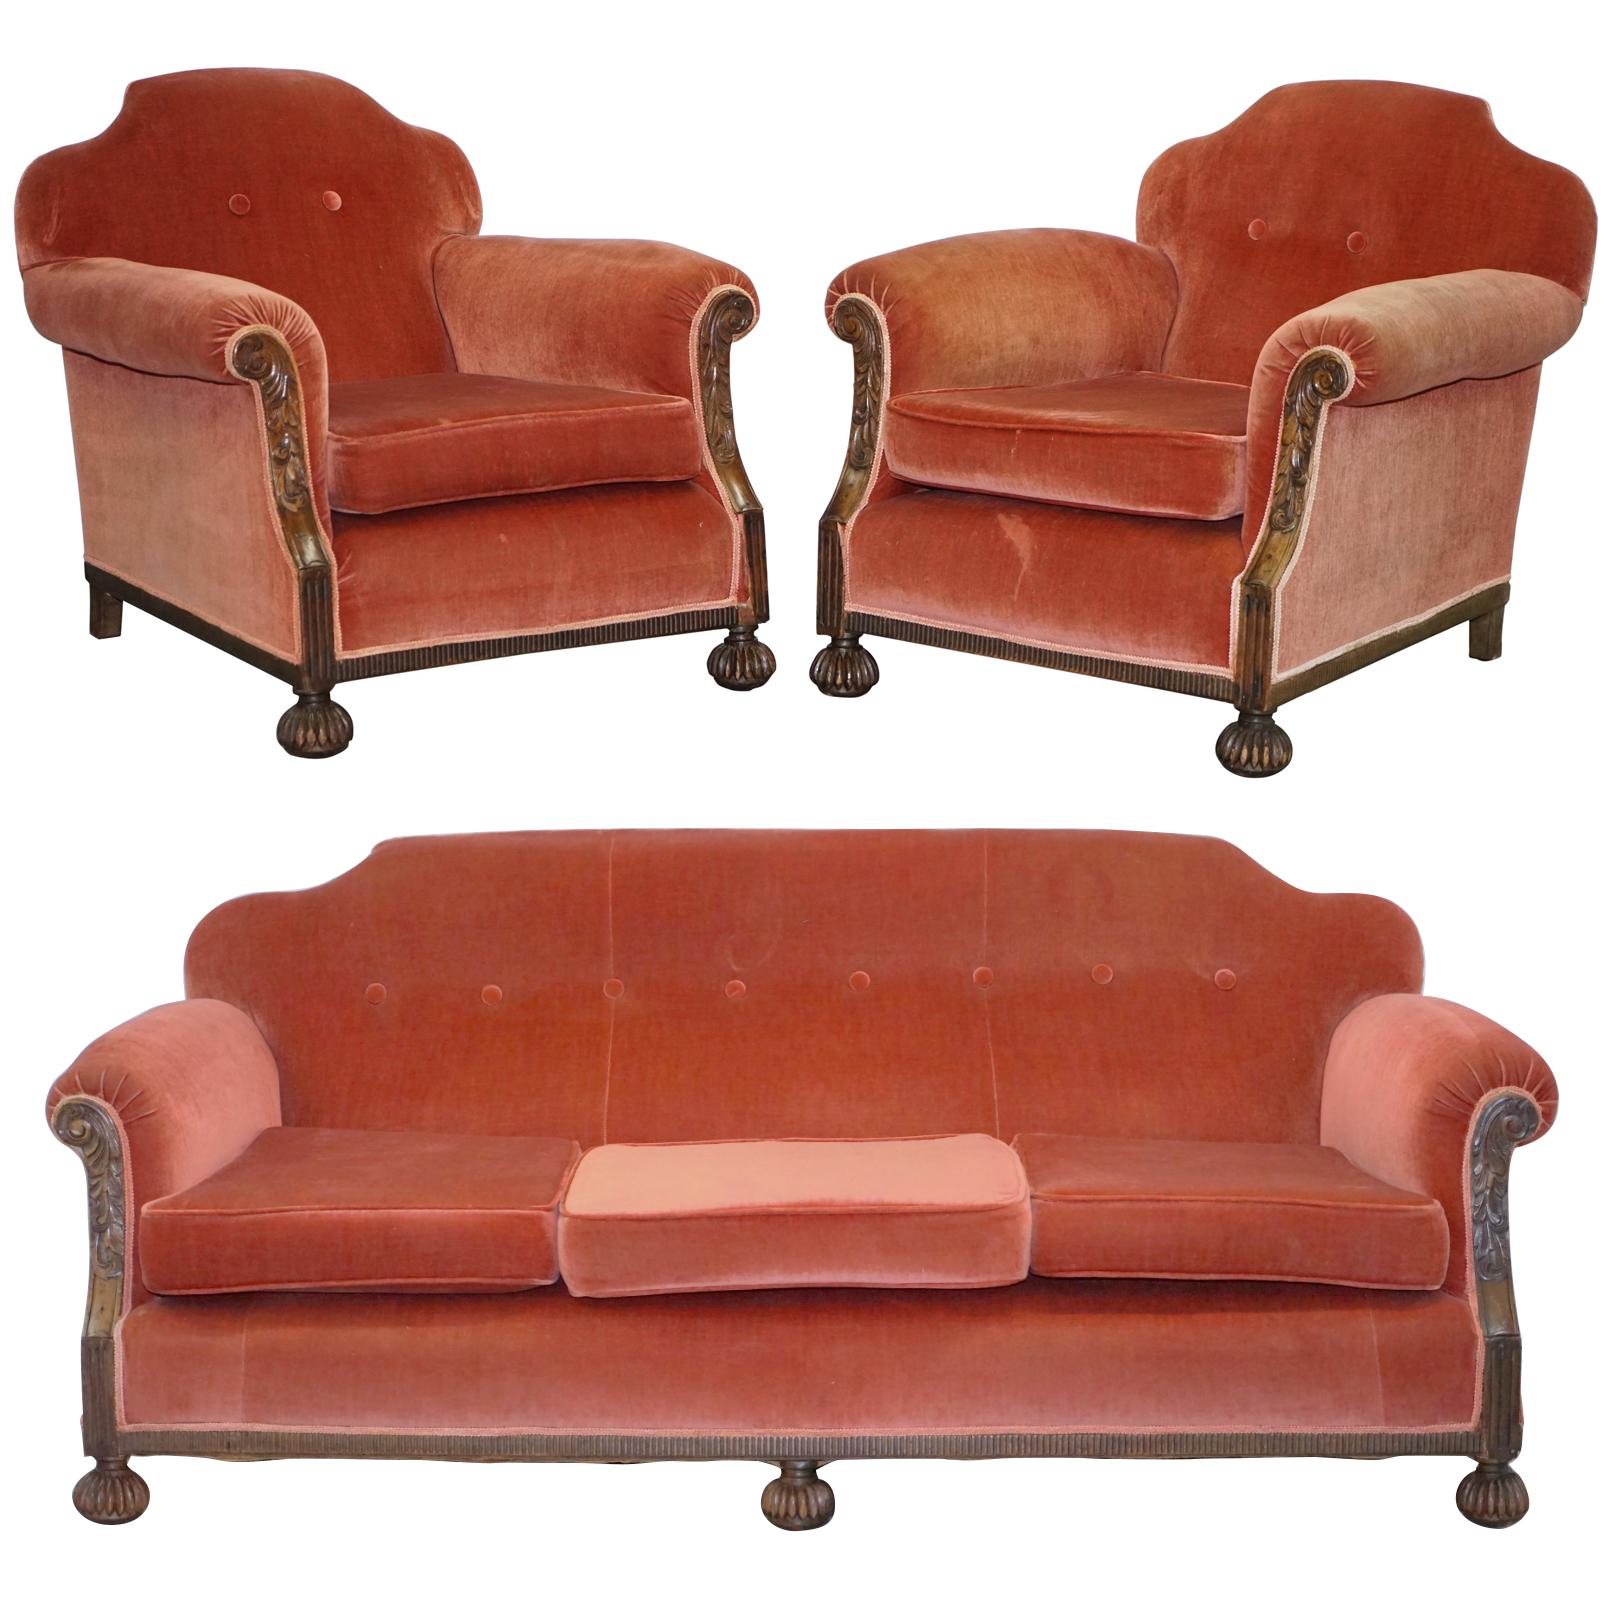 Rare Original Victorian Suite Ideal Restoration Project Club Armchairs and Sofa